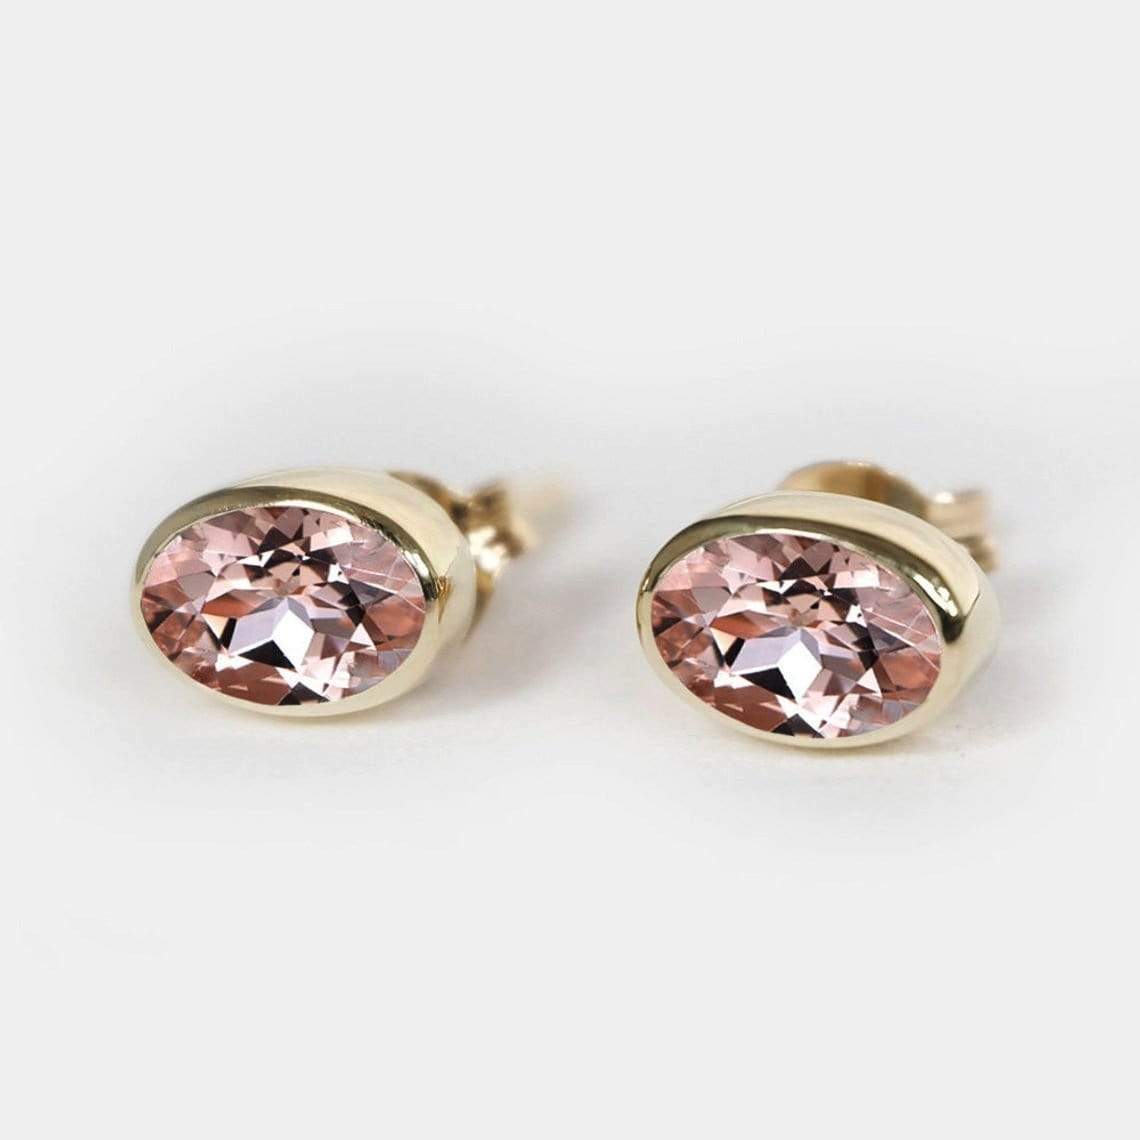 0.45 Carats 14k Solid Gold Morganite Earrings - SOVATS